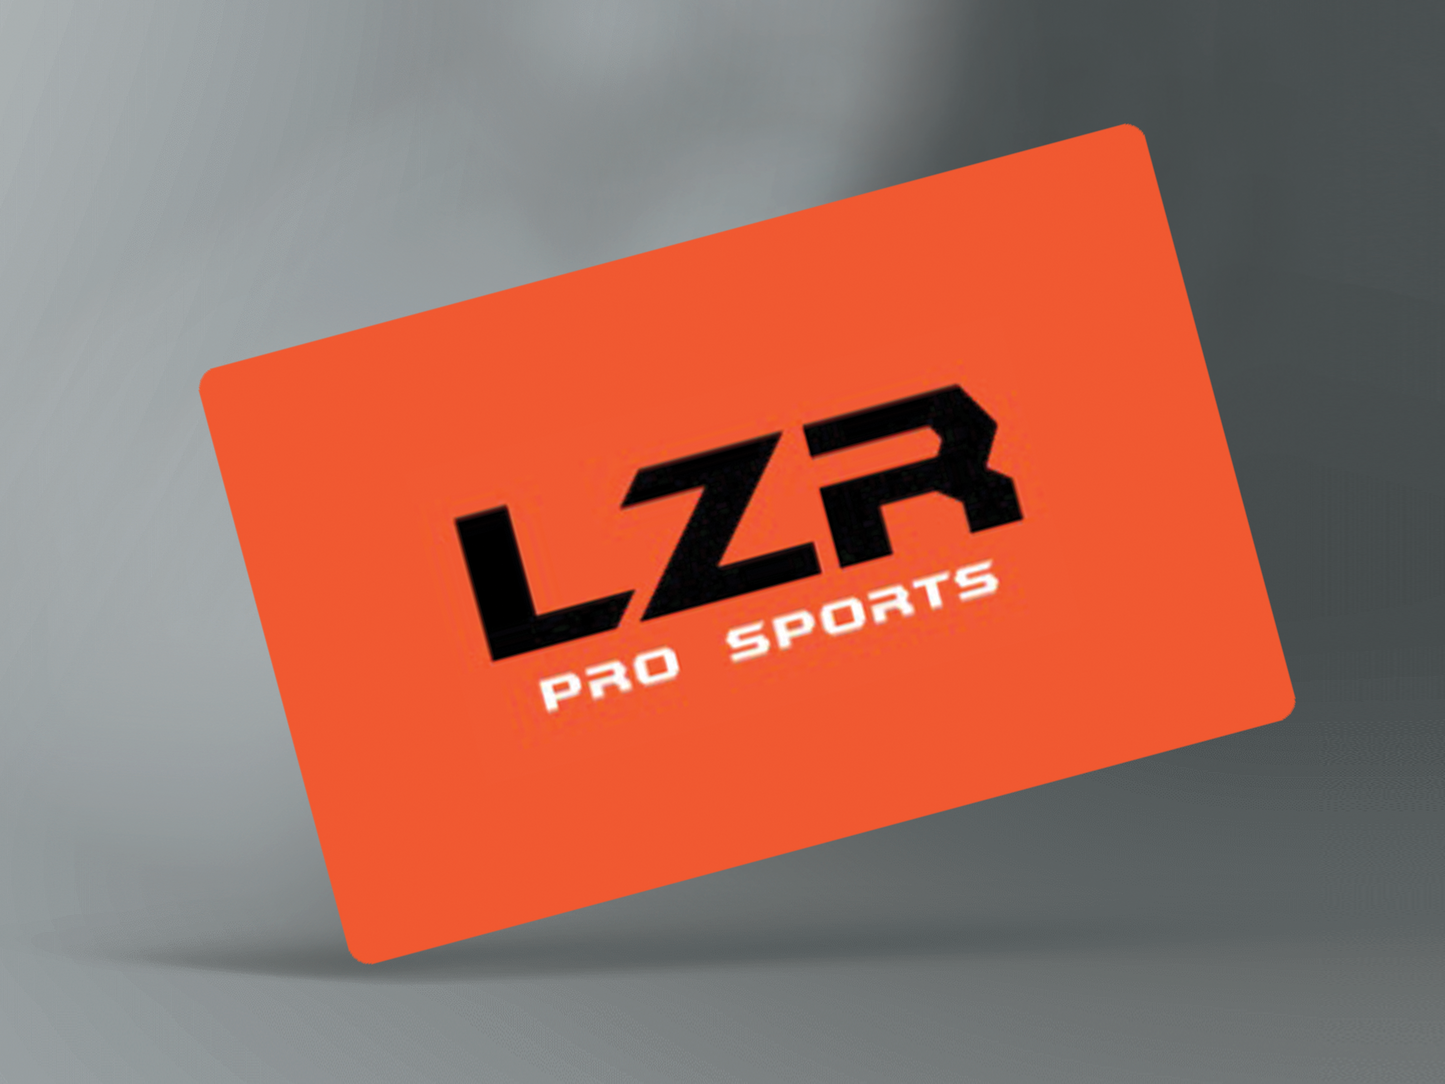 LZR Gift Card